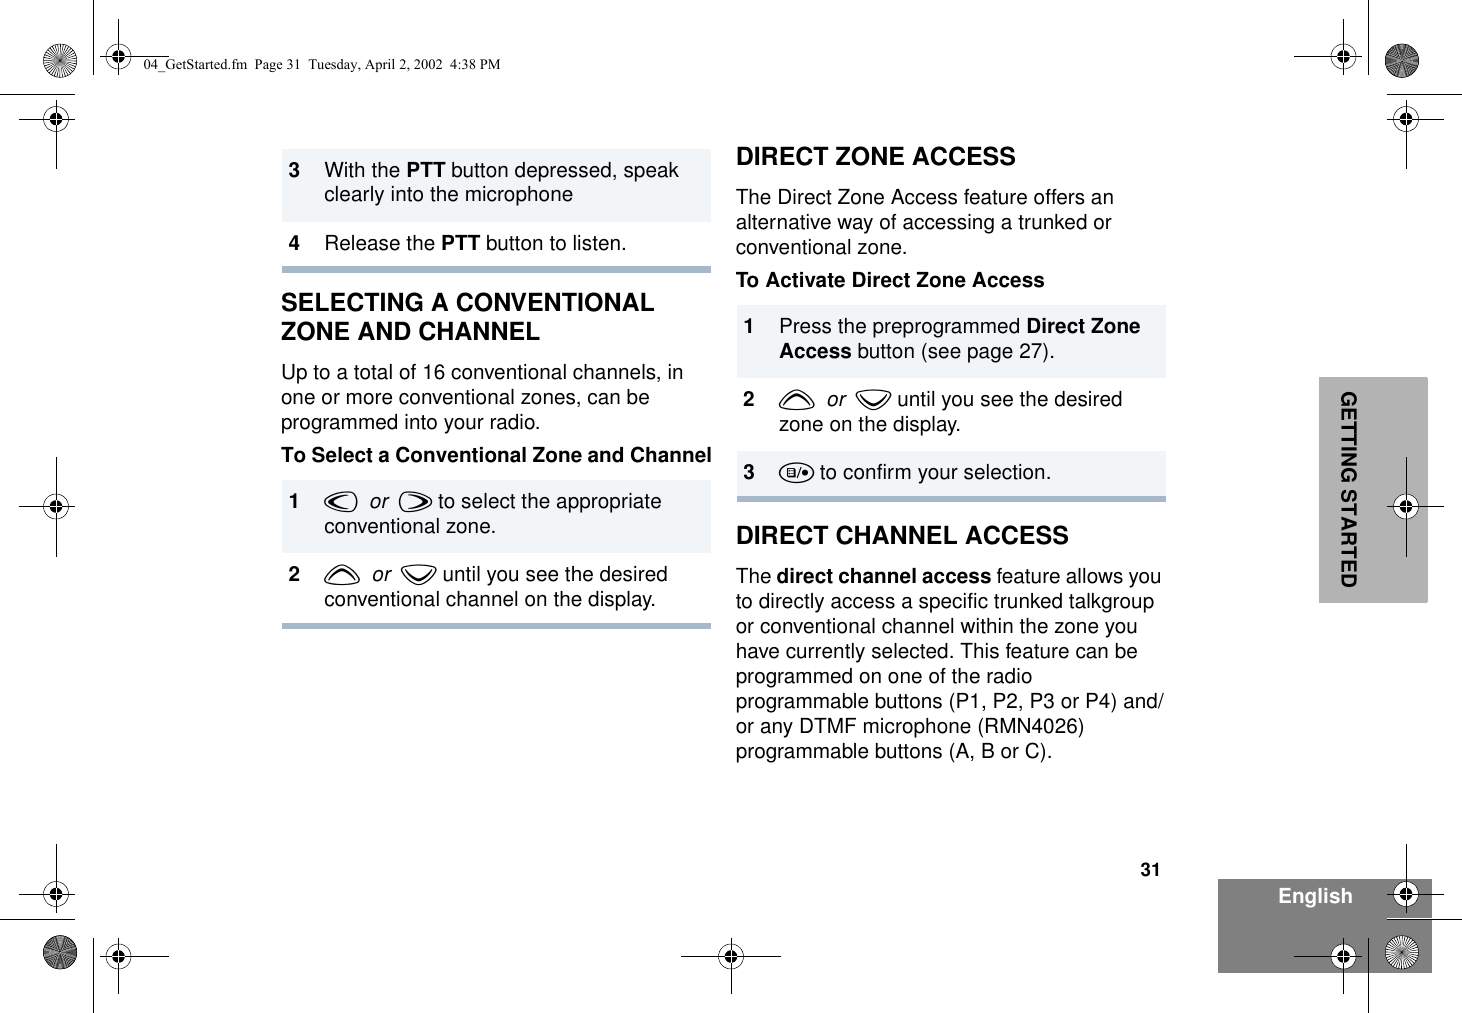 31EnglishGETTING STARTEDSELECTING A CONVENTIONAL ZONE AND CHANNELUp to a total of 16 conventional channels, in one or more conventional zones, can be programmed into your radio. To Select a Conventional Zone and ChannelDIRECT ZONE ACCESSThe Direct Zone Access feature offers an alternative way of accessing a trunked or conventional zone. To Activate Direct Zone AccessDIRECT CHANNEL ACCESSThe direct channel access feature allows you to directly access a specific trunked talkgroup or conventional channel within the zone you have currently selected. This feature can be programmed on one of the radio programmable buttons (P1, P2, P3 or P4) and/or any DTMF microphone (RMN4026) programmable buttons (A, B or C).3With the PTT button depressed, speak clearly into the microphone4Release the PTT button to listen.1v  or  w to select the appropriate conventional zone.2y  or  z until you see the desired conventional channel on the display.1Press the preprogrammed Direct Zone Access button (see page 27).2y  or  z until you see the desired zone on the display.3u to confirm your selection.04_GetStarted.fm  Page 31  Tuesday, April 2, 2002  4:38 PM